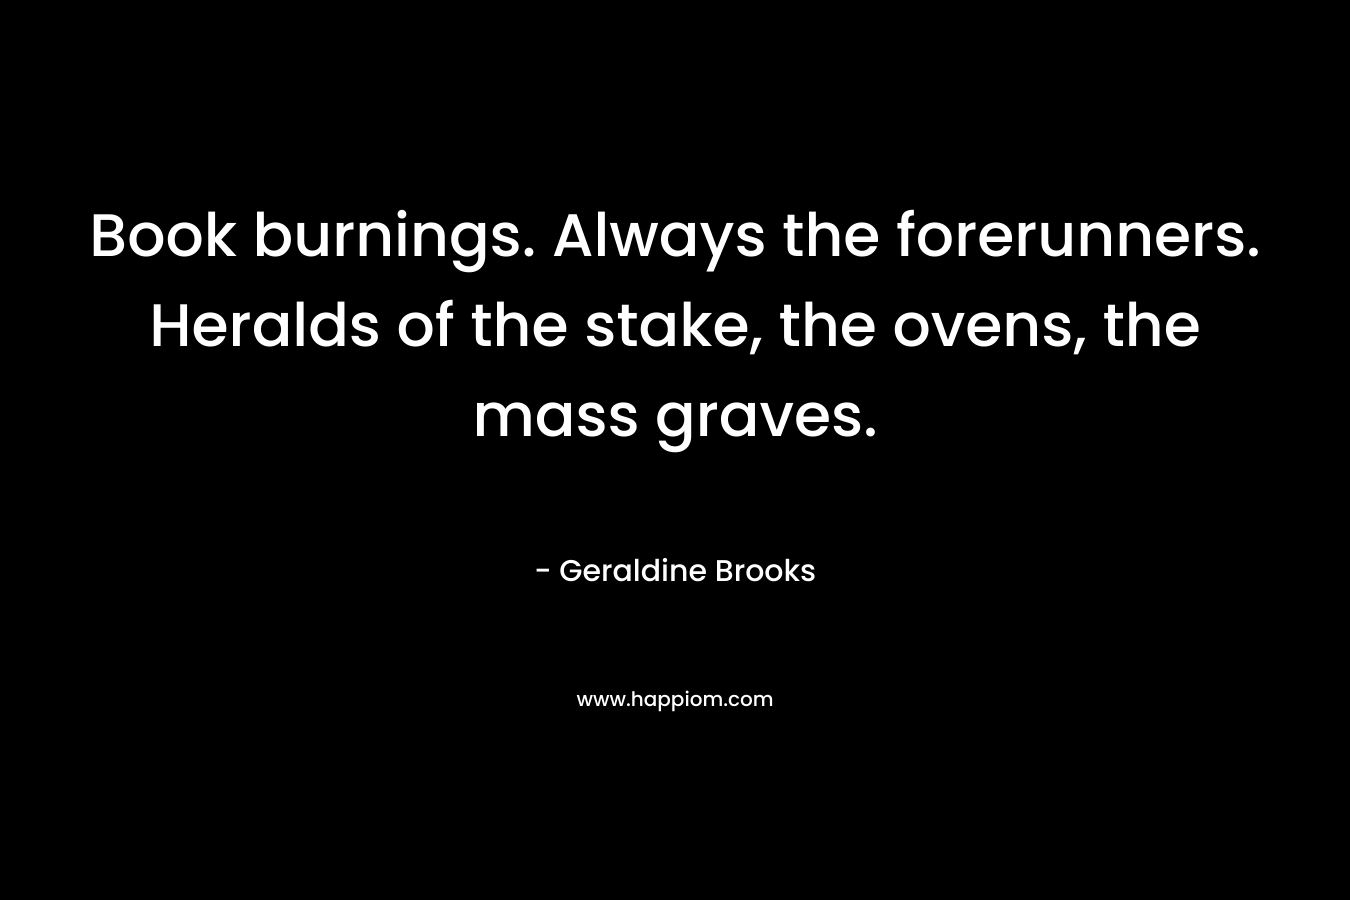 Book burnings. Always the forerunners. Heralds of the stake, the ovens, the mass graves.